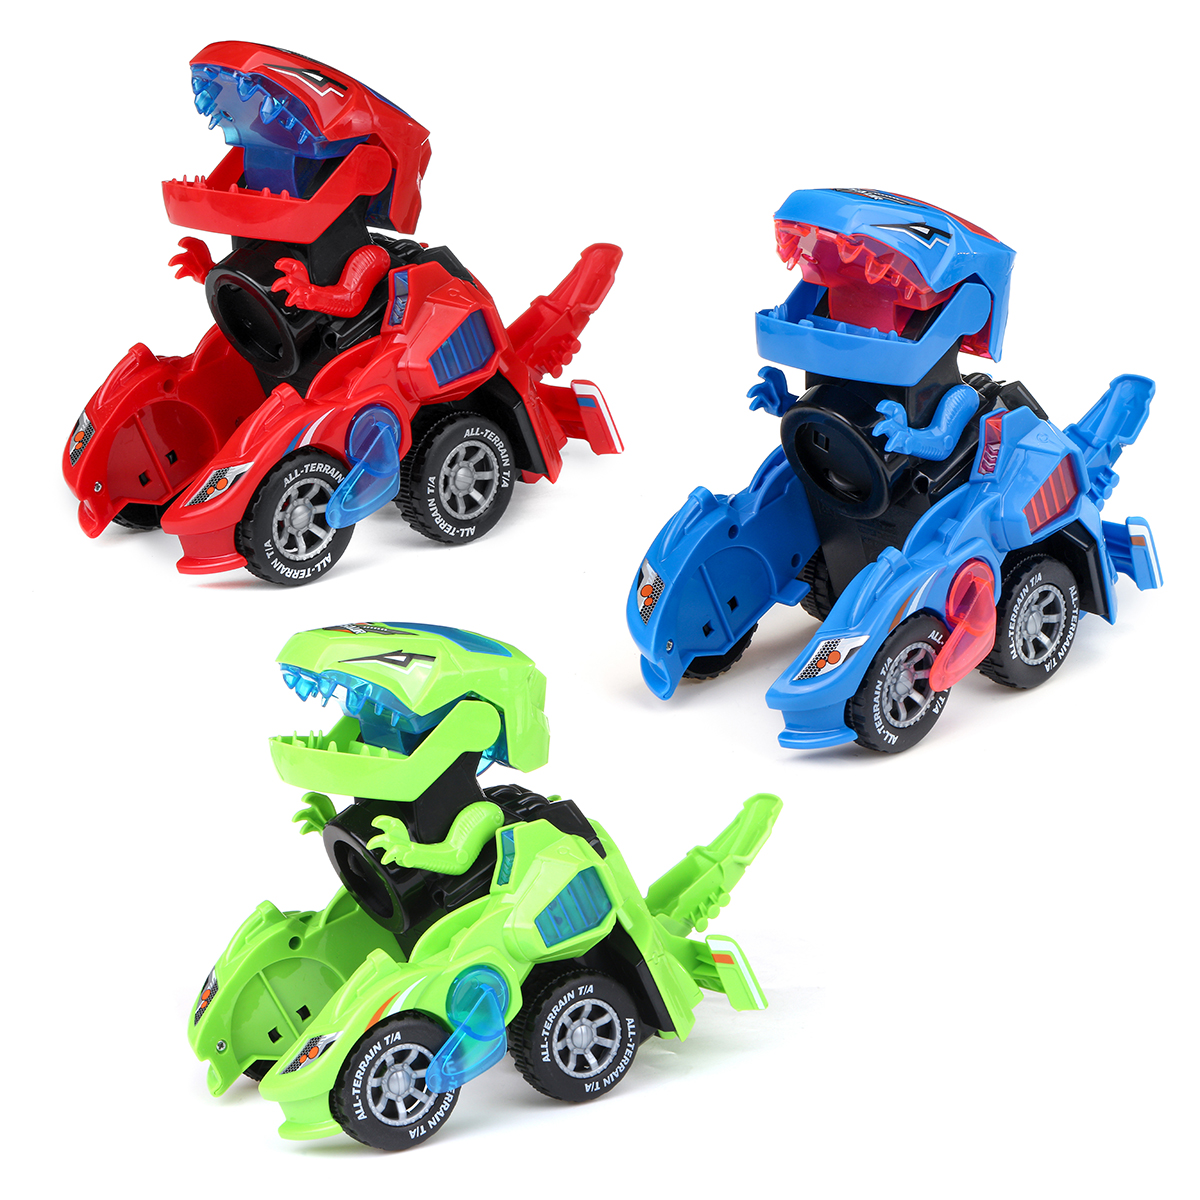 Creative-Dinosaur-Deformation-Toy-Car-Puzzle-Dinosaur-Electric-Toy-Car-Light-and-Music-Electric-Defo-1757309-7